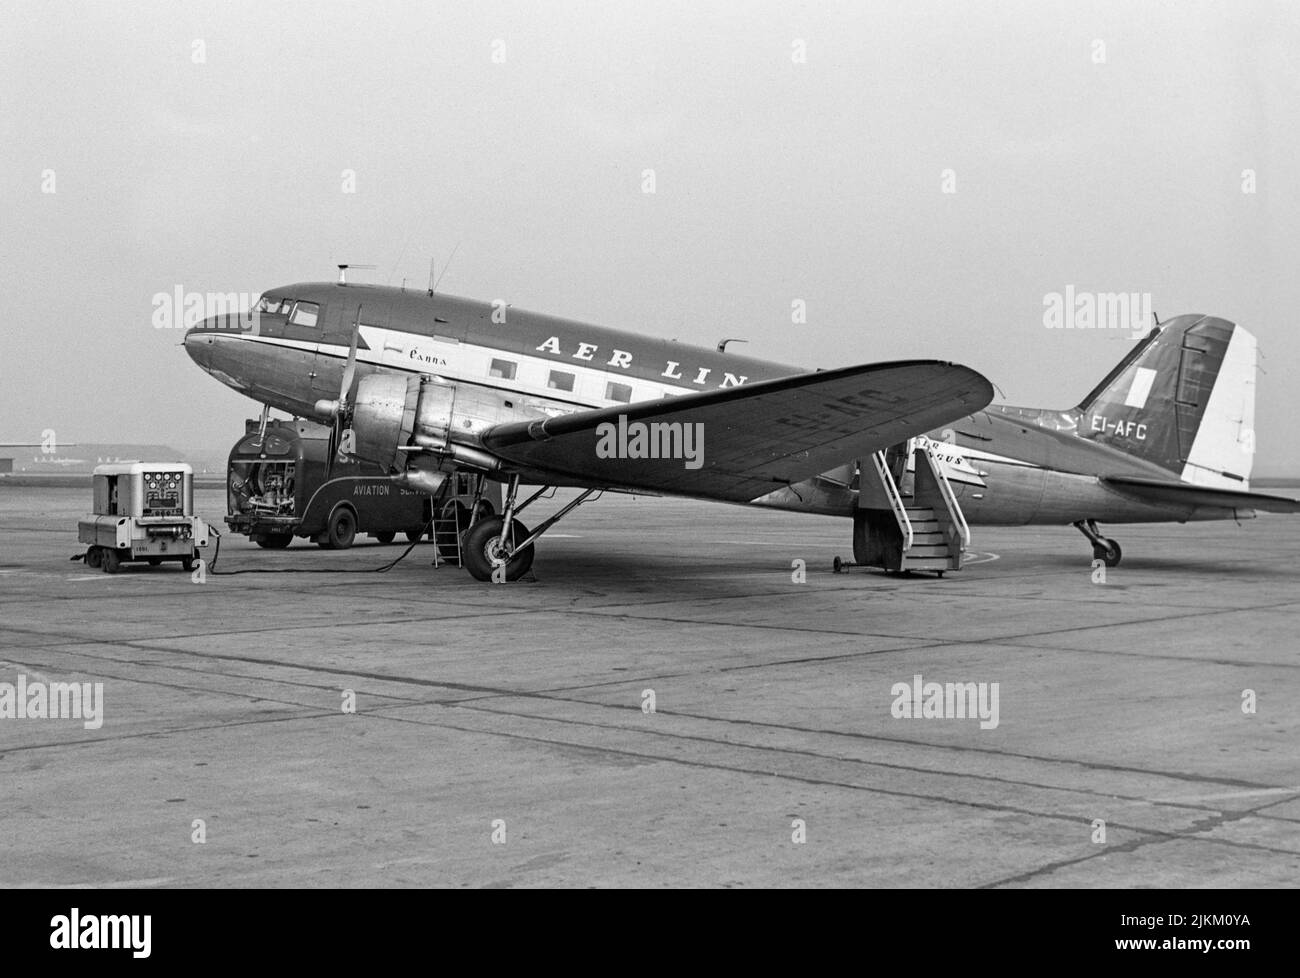 A vintage 1960s black and white photograph of an Are Lingus Douglas DC-3, C-47, airliner. Registration EI-AFC. Aircraft is on the tarmac at an airport in England, with the passenger stairs at the rear door. Stock Photo